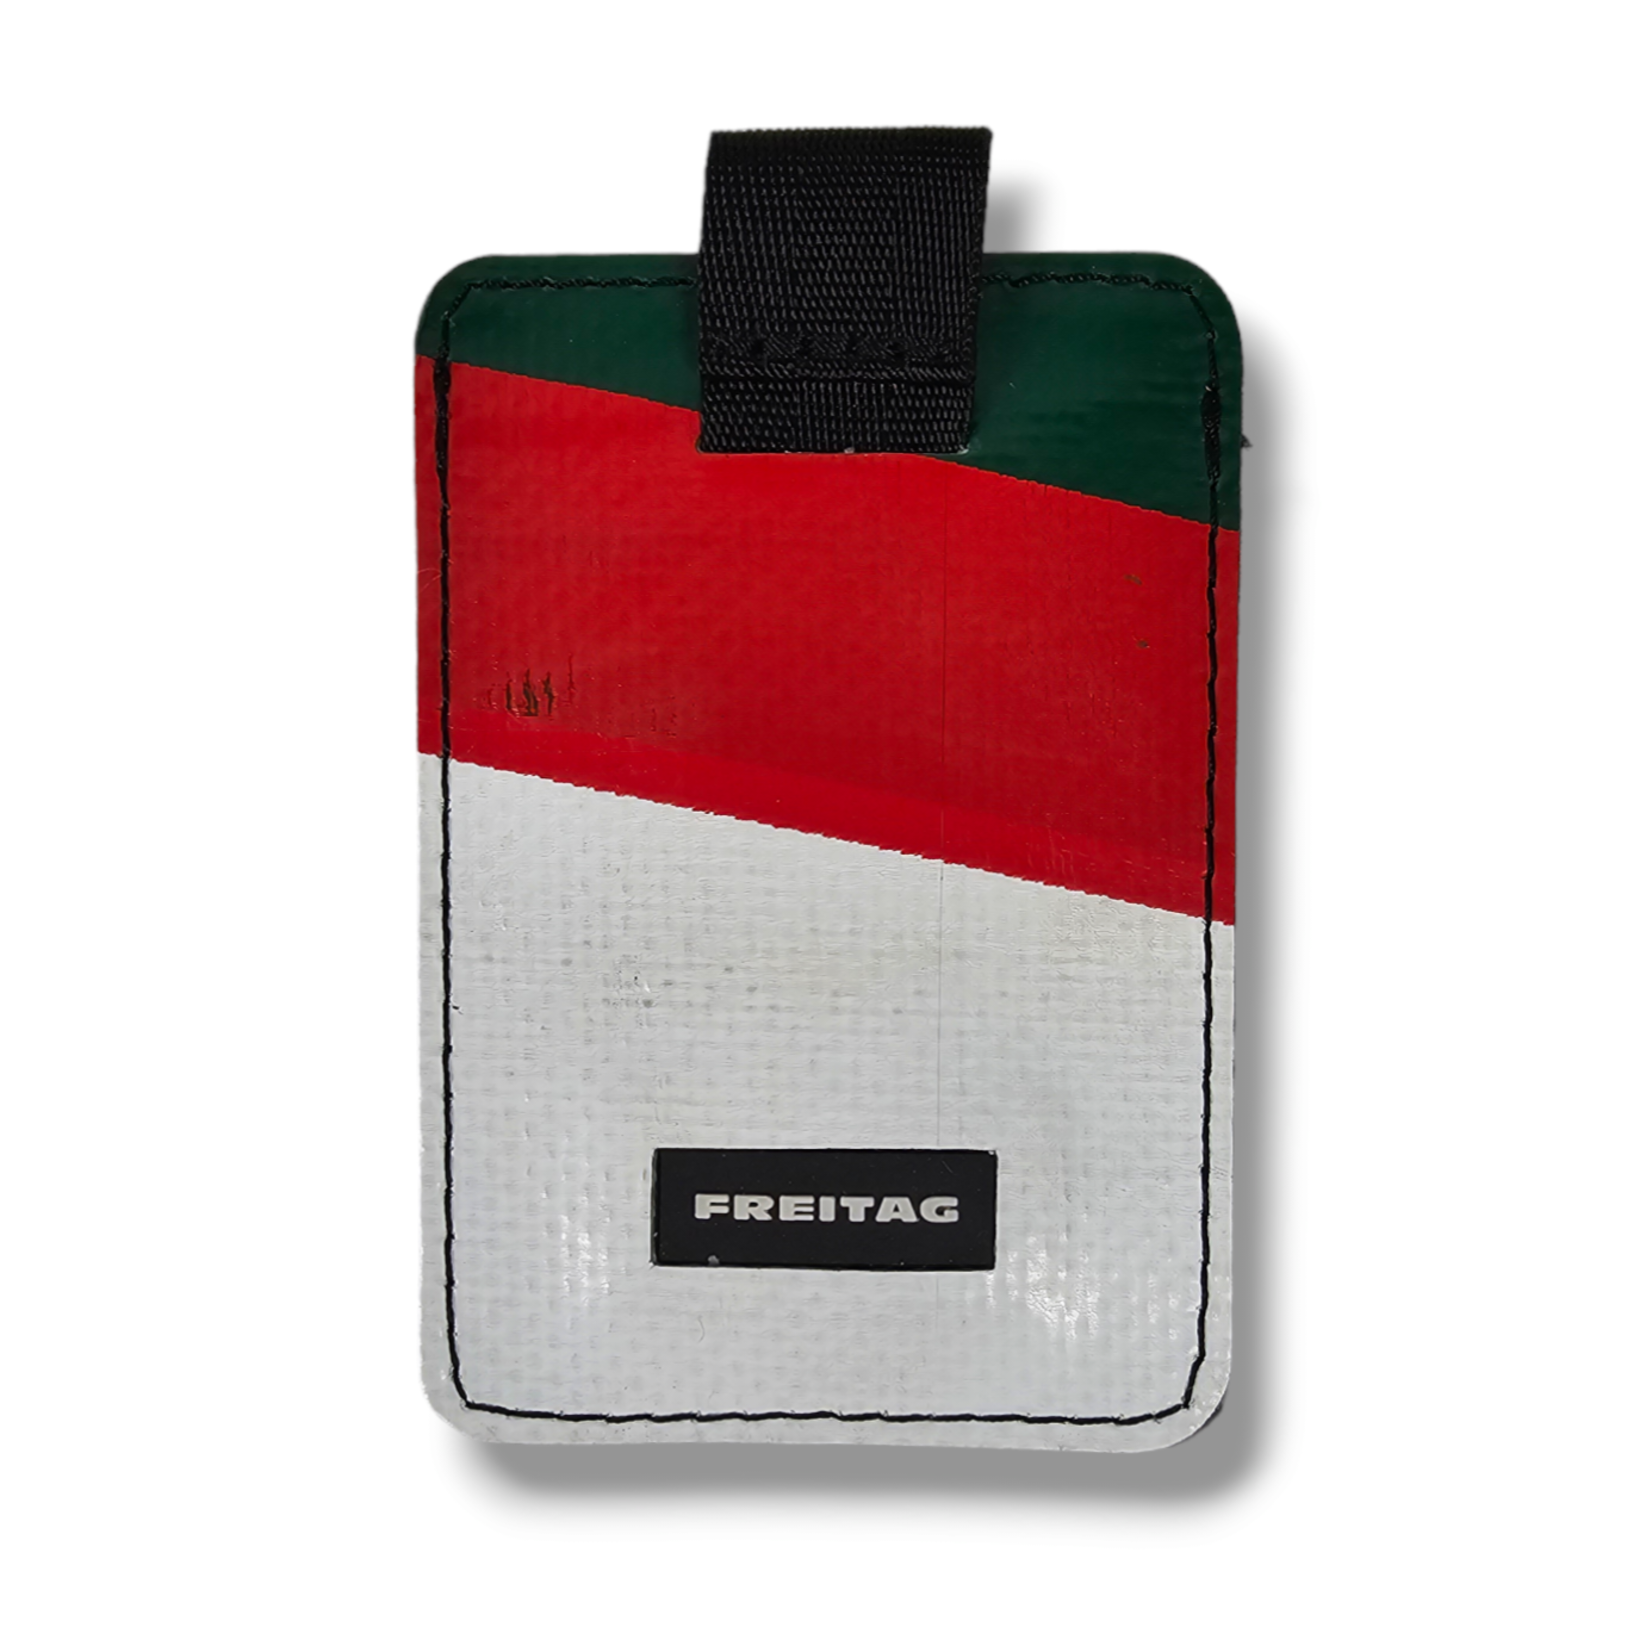 FREITAG F380 JUSTIN  card holder for phone case